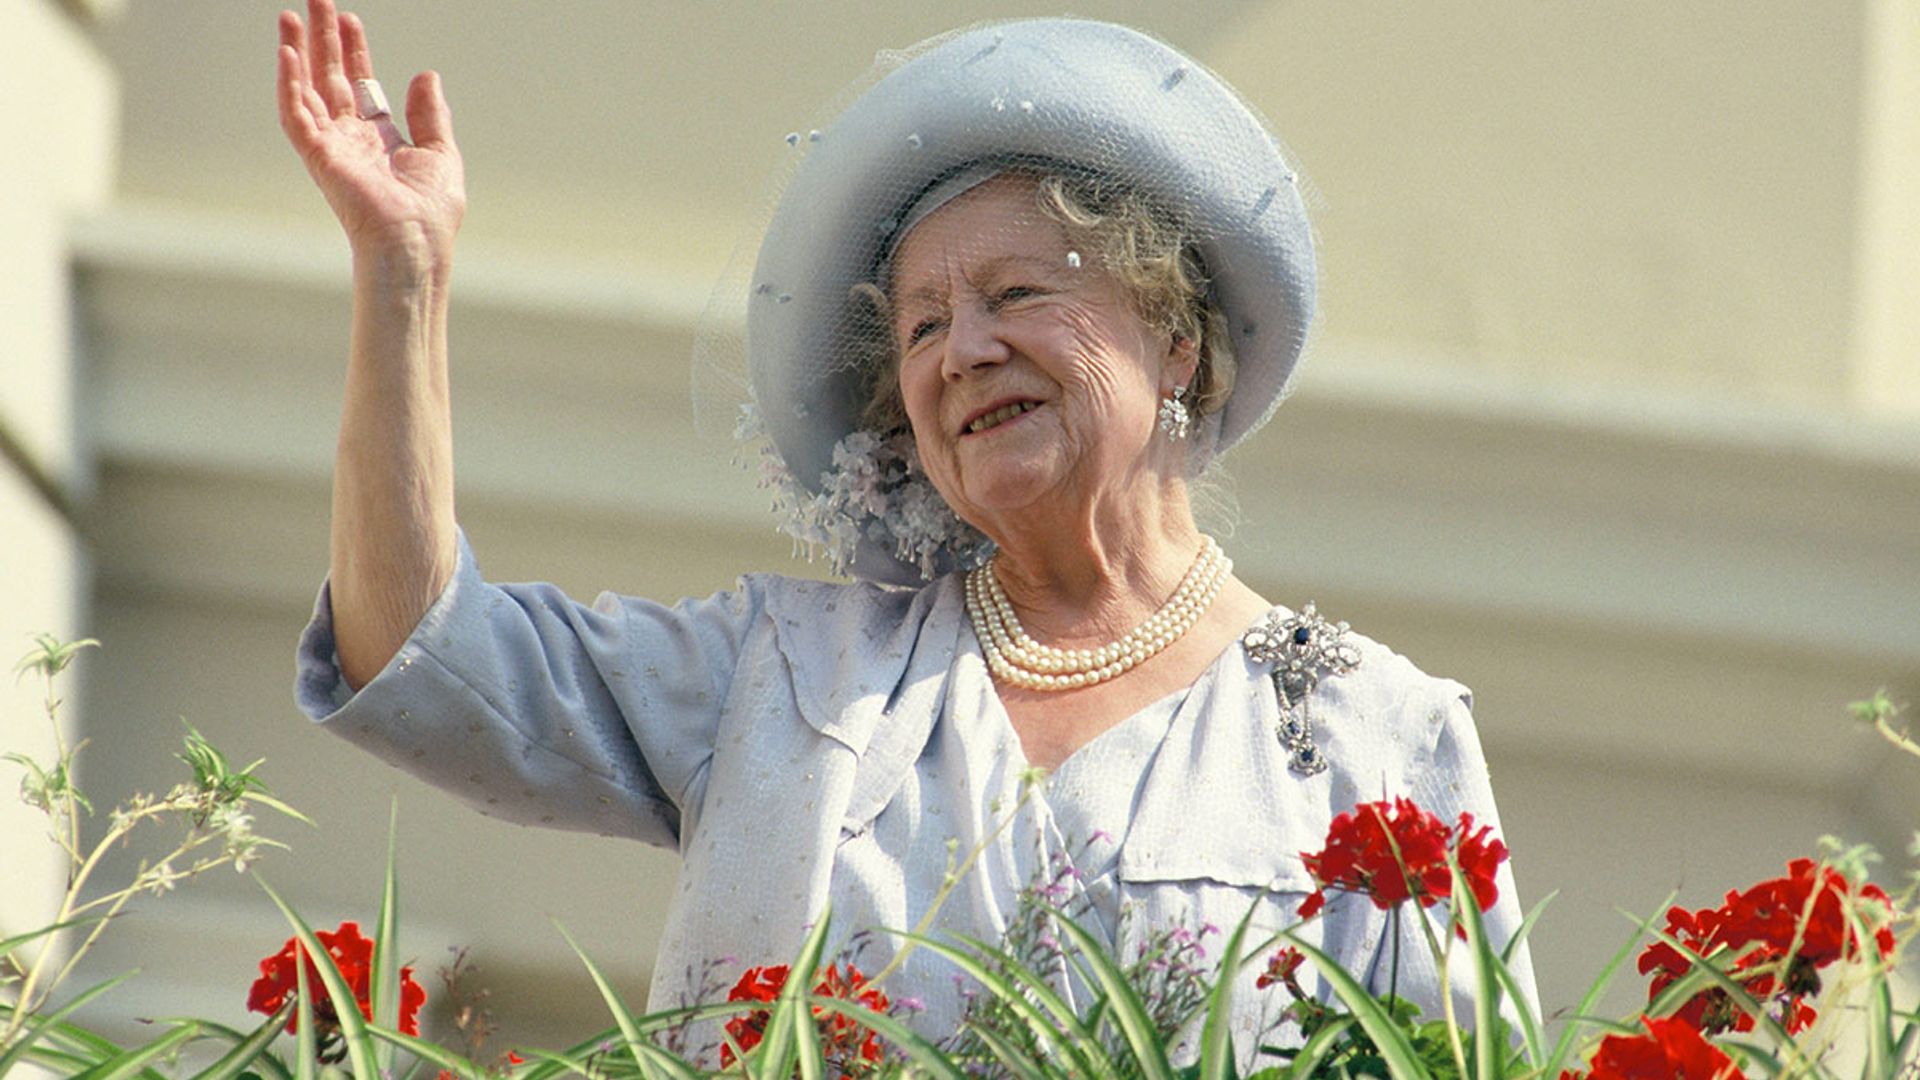 The Queen Mother drank this controversial drink every day